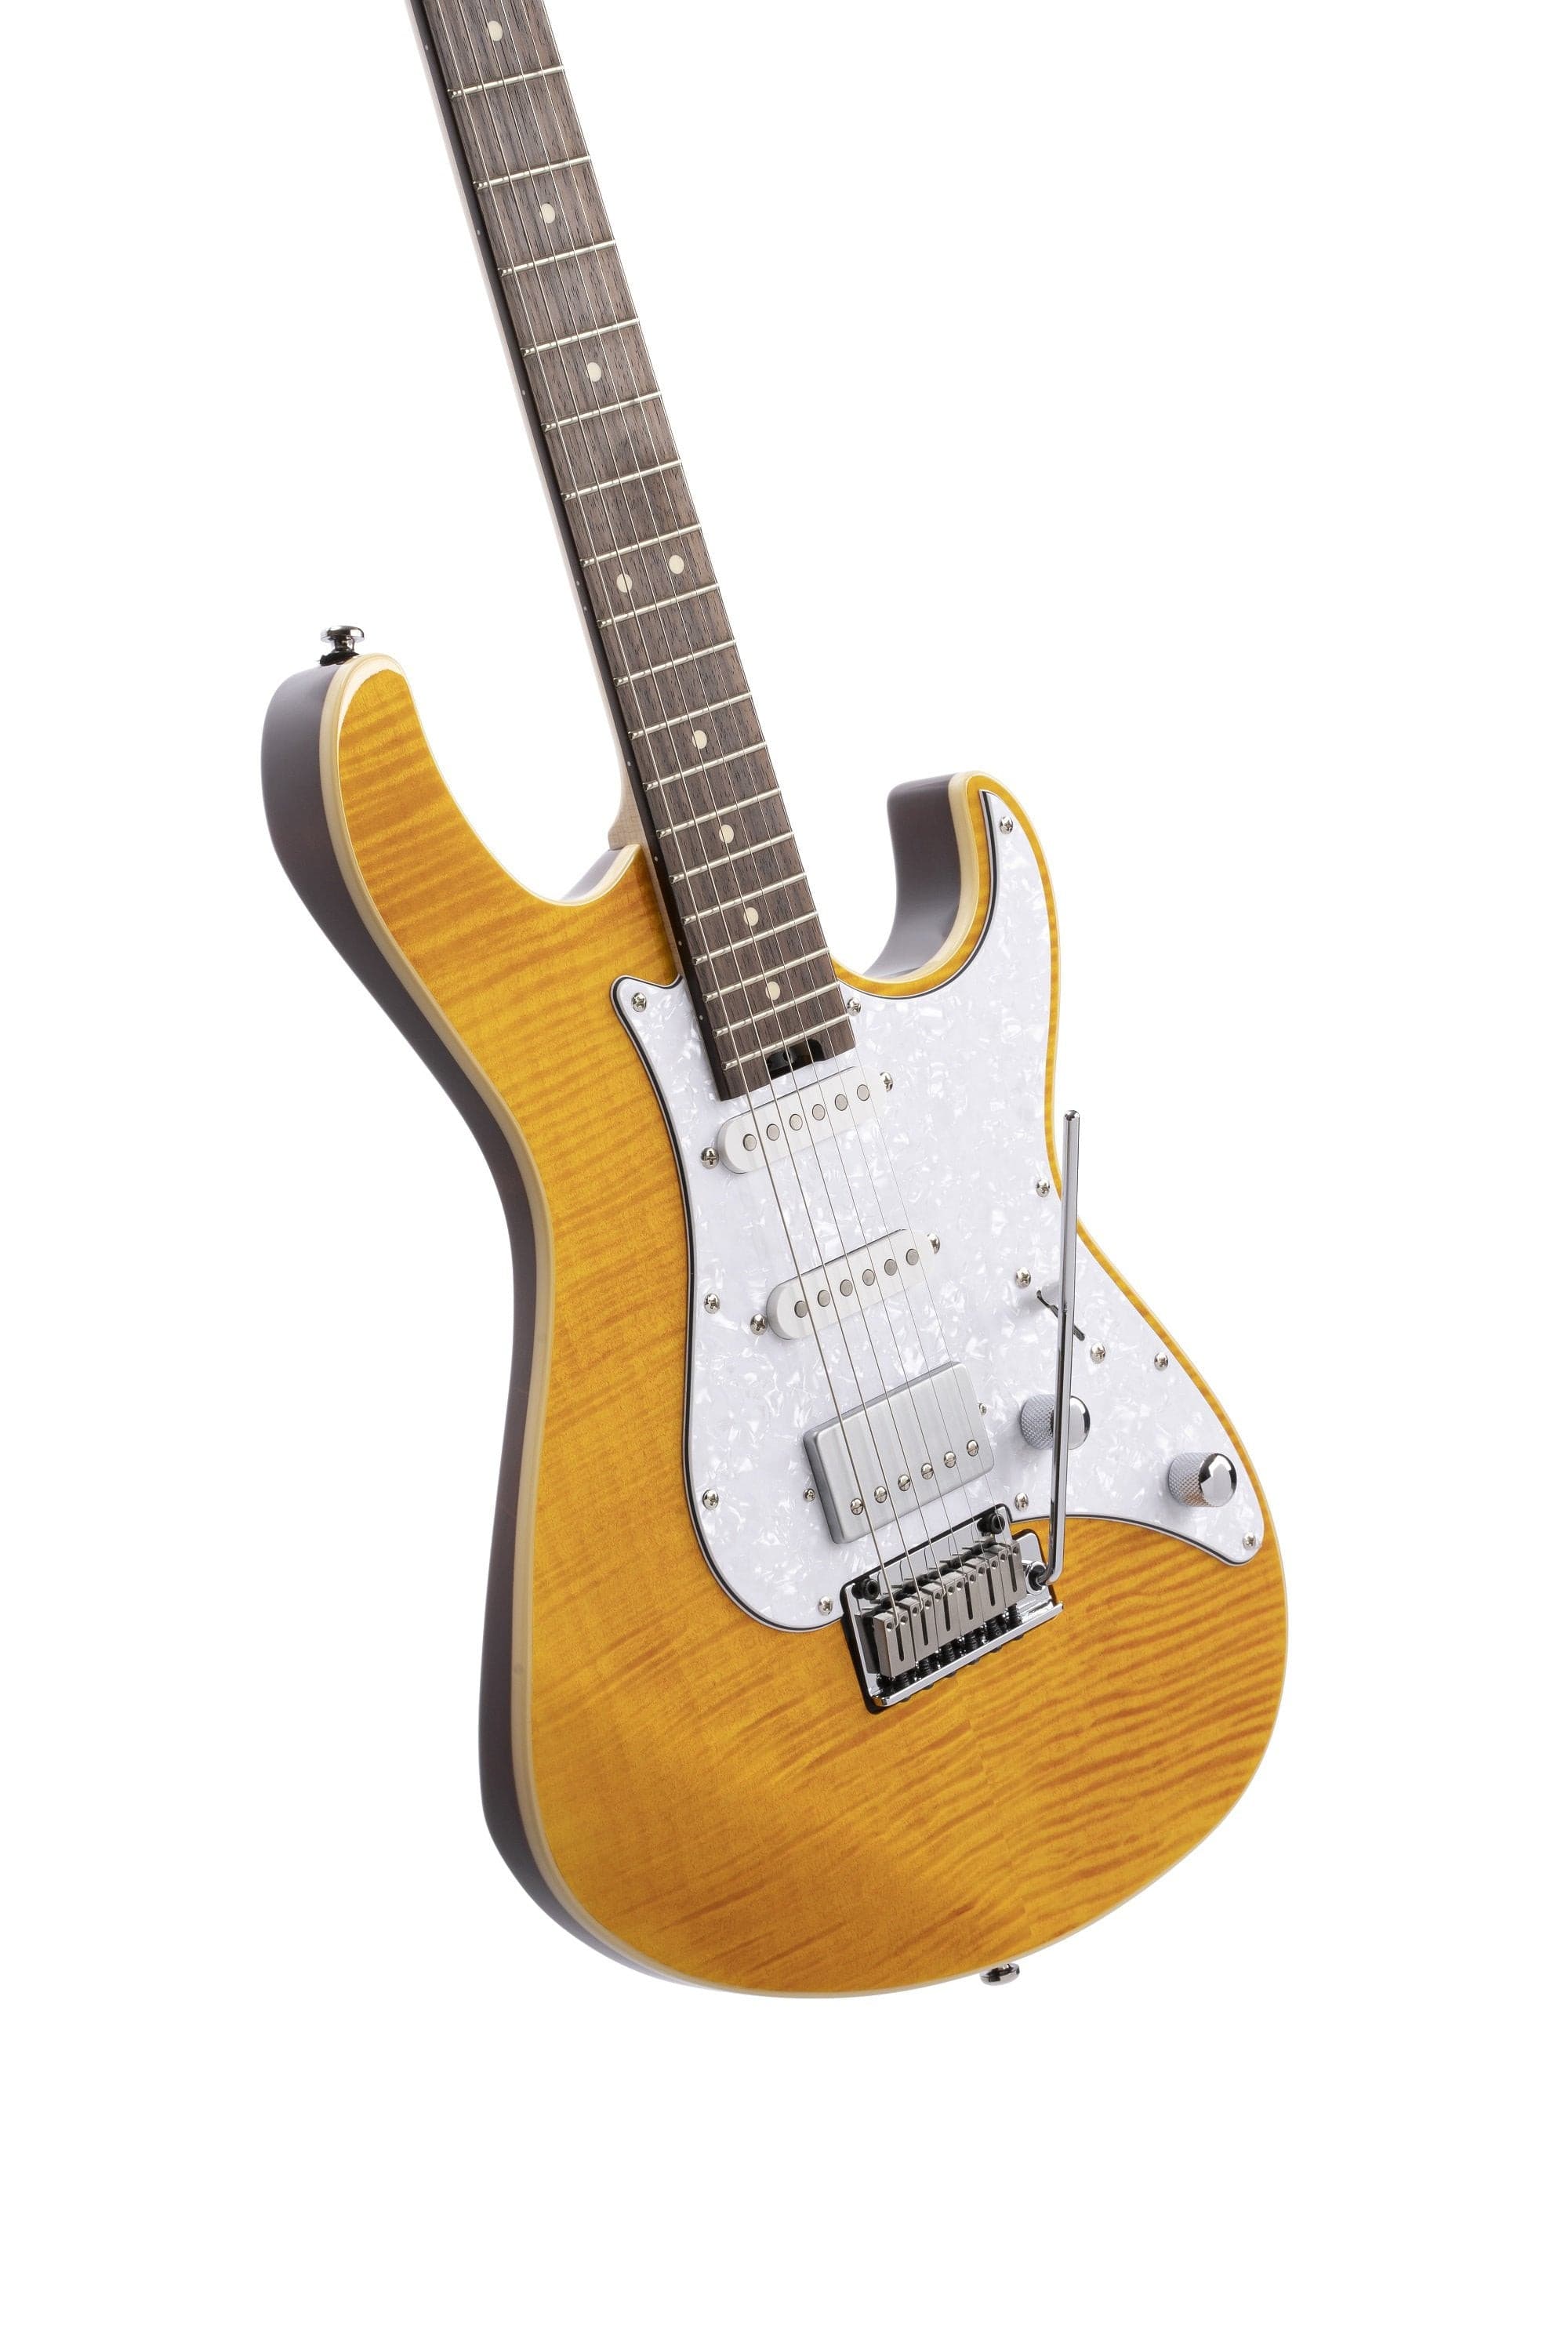 Cort G280 Select Amber, Electric Guitar for sale at Richards Guitars.